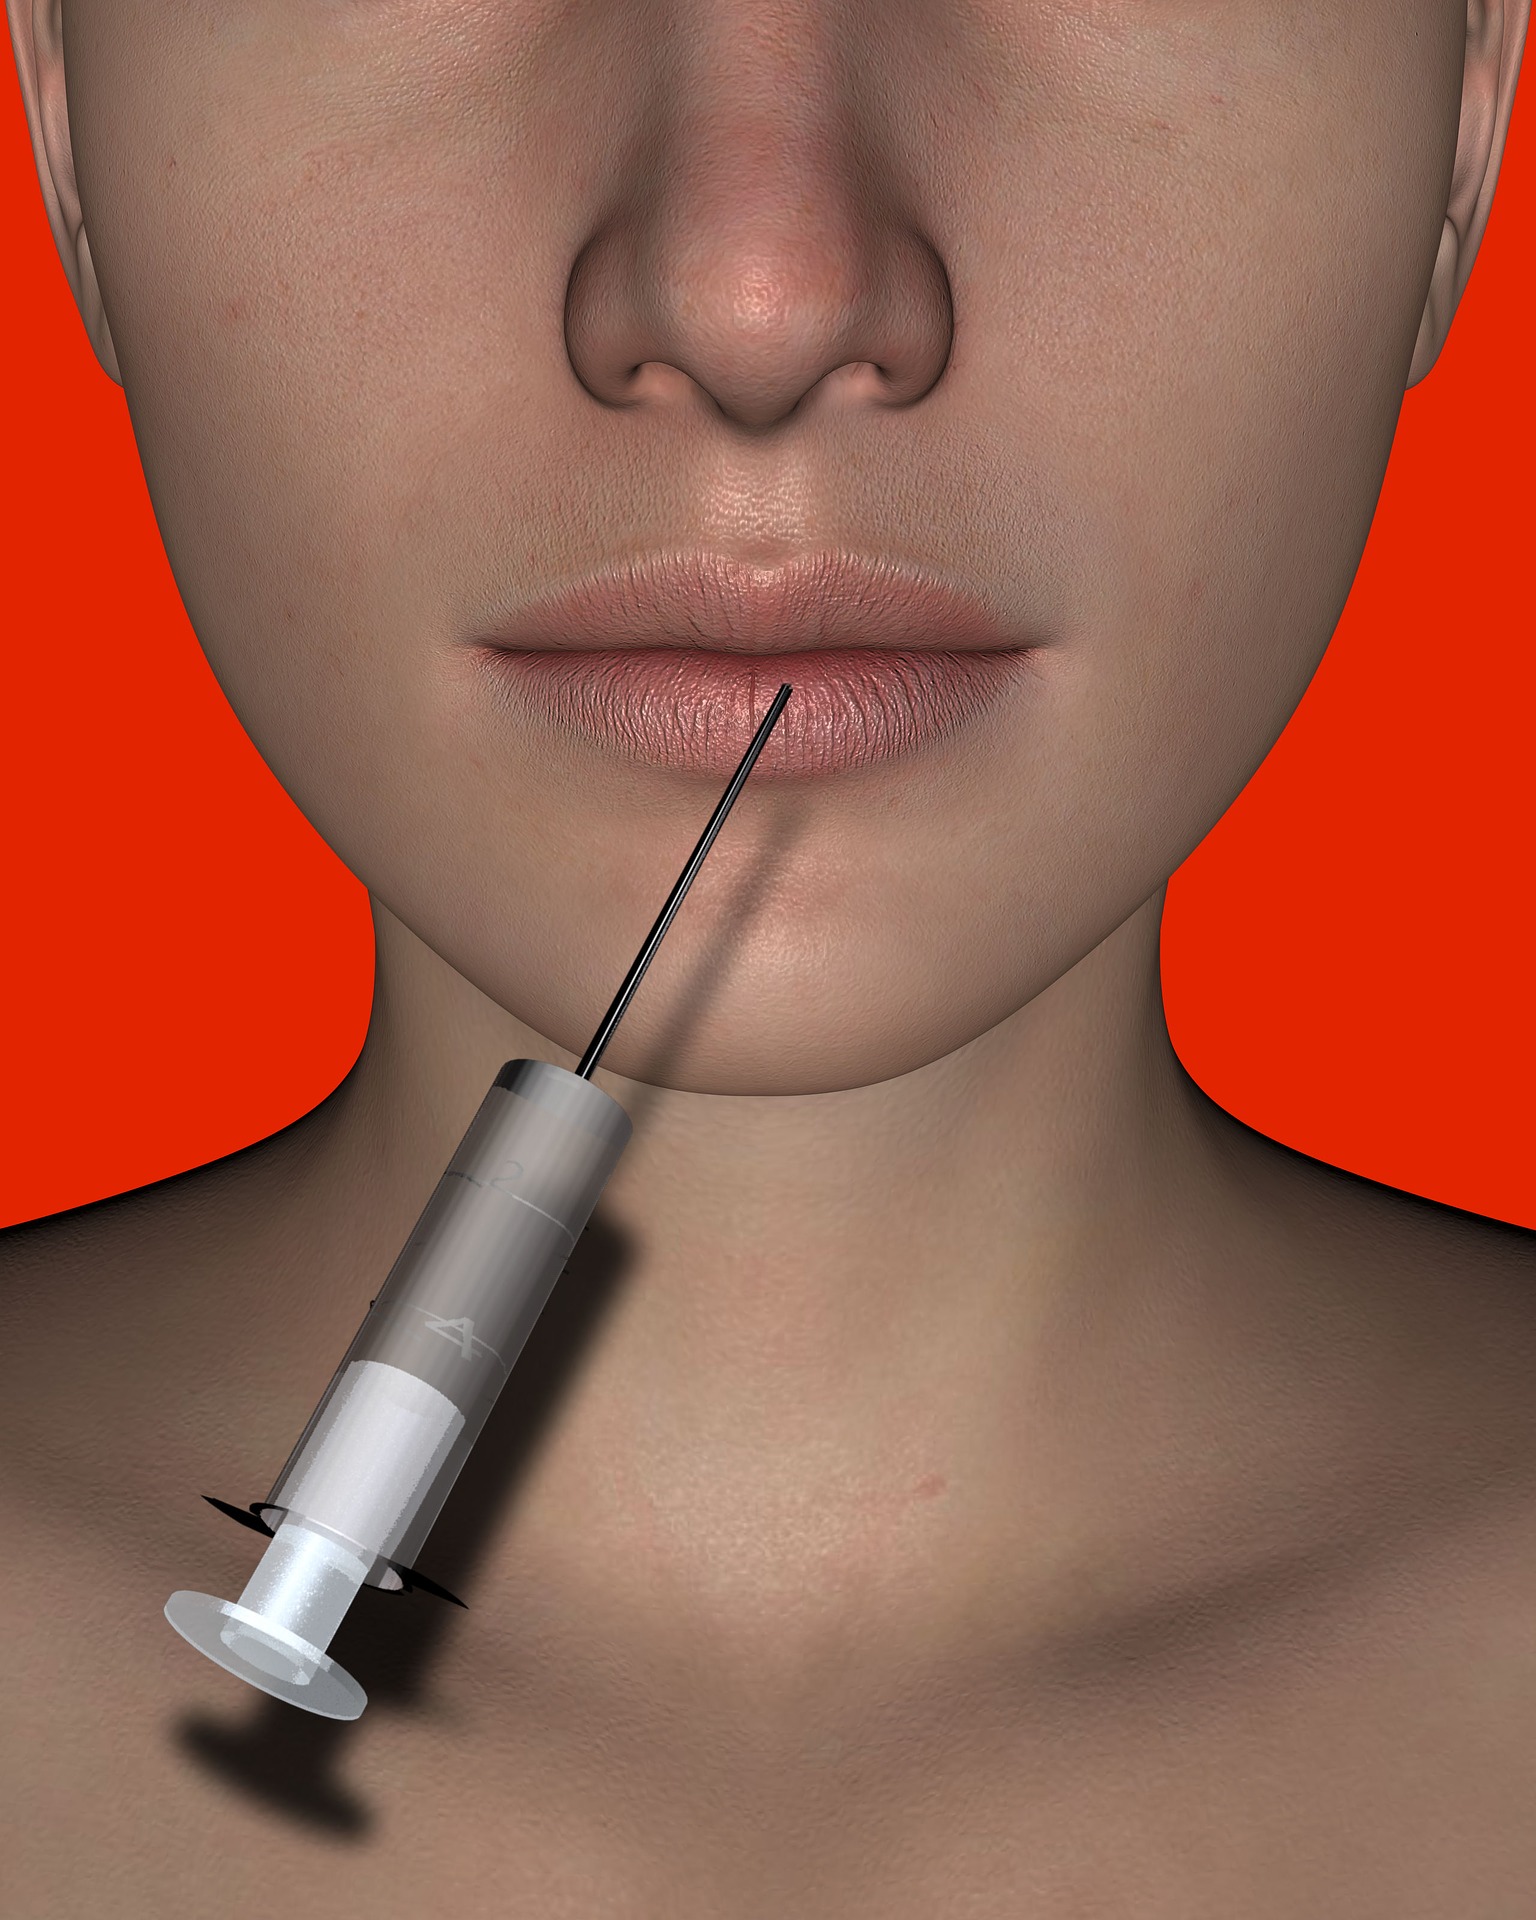 Botox or hyaluron injection into the lip